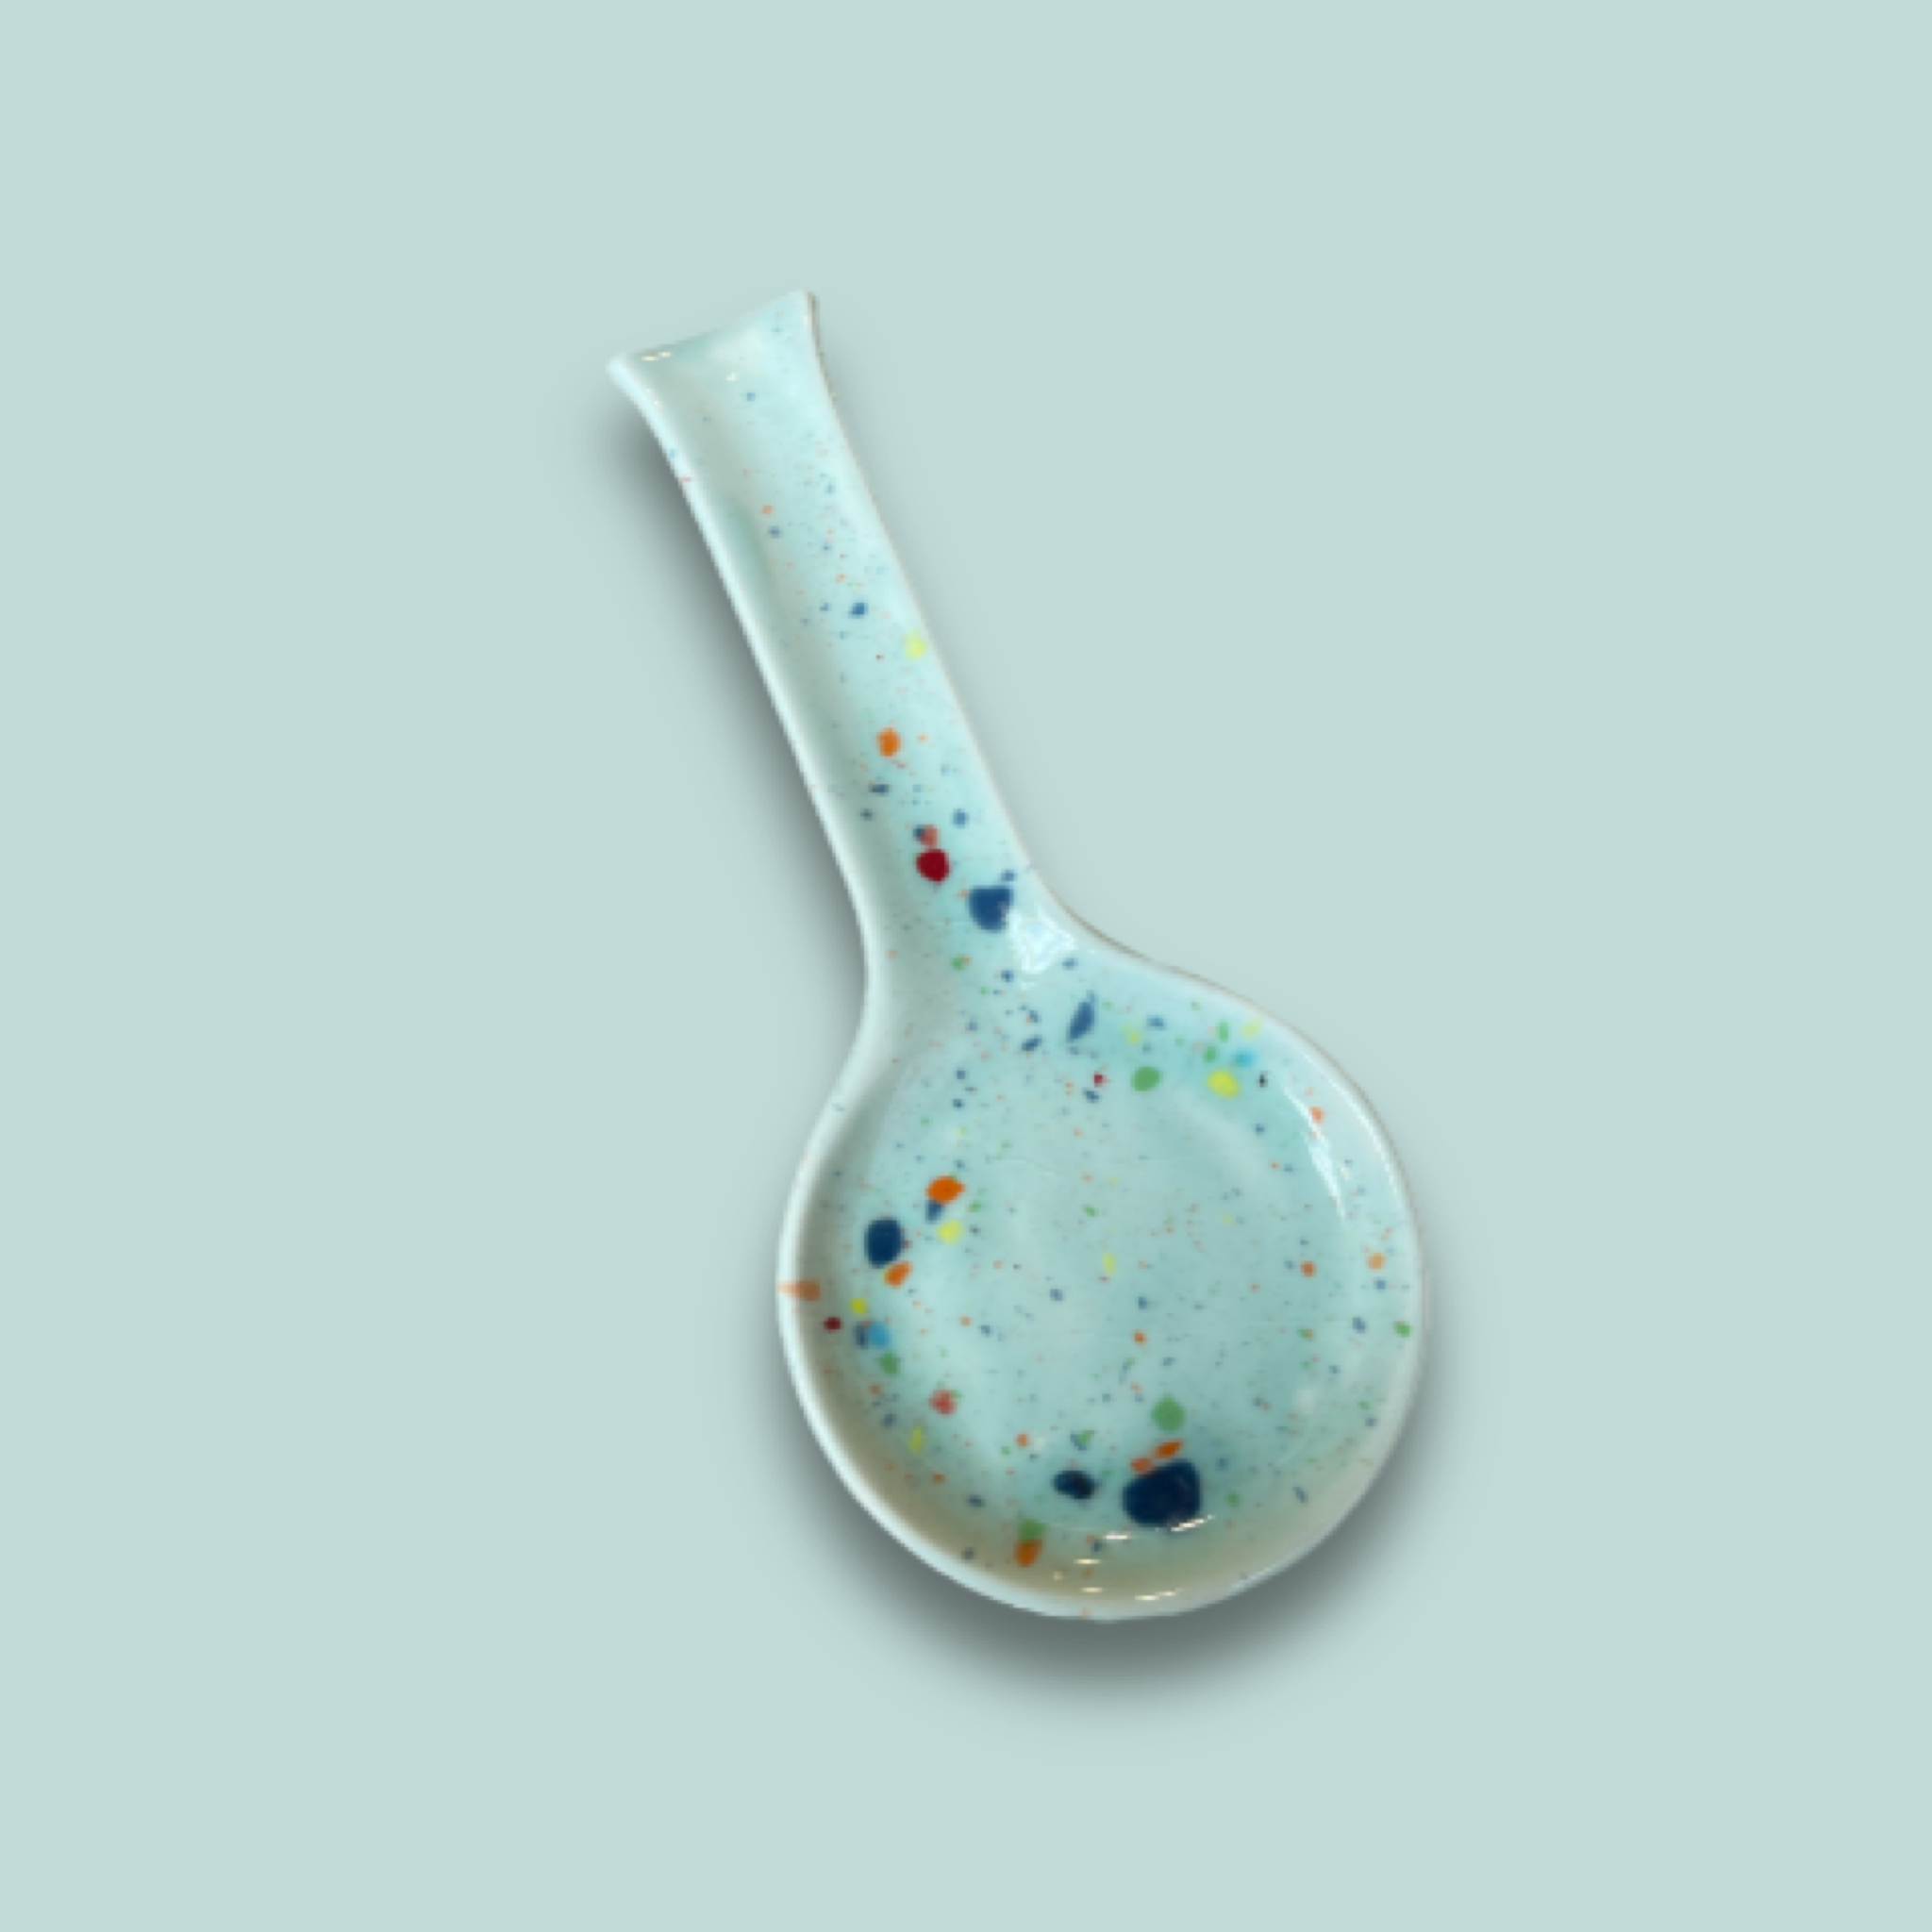 CARNIVAL SPOON REST by Suuuper